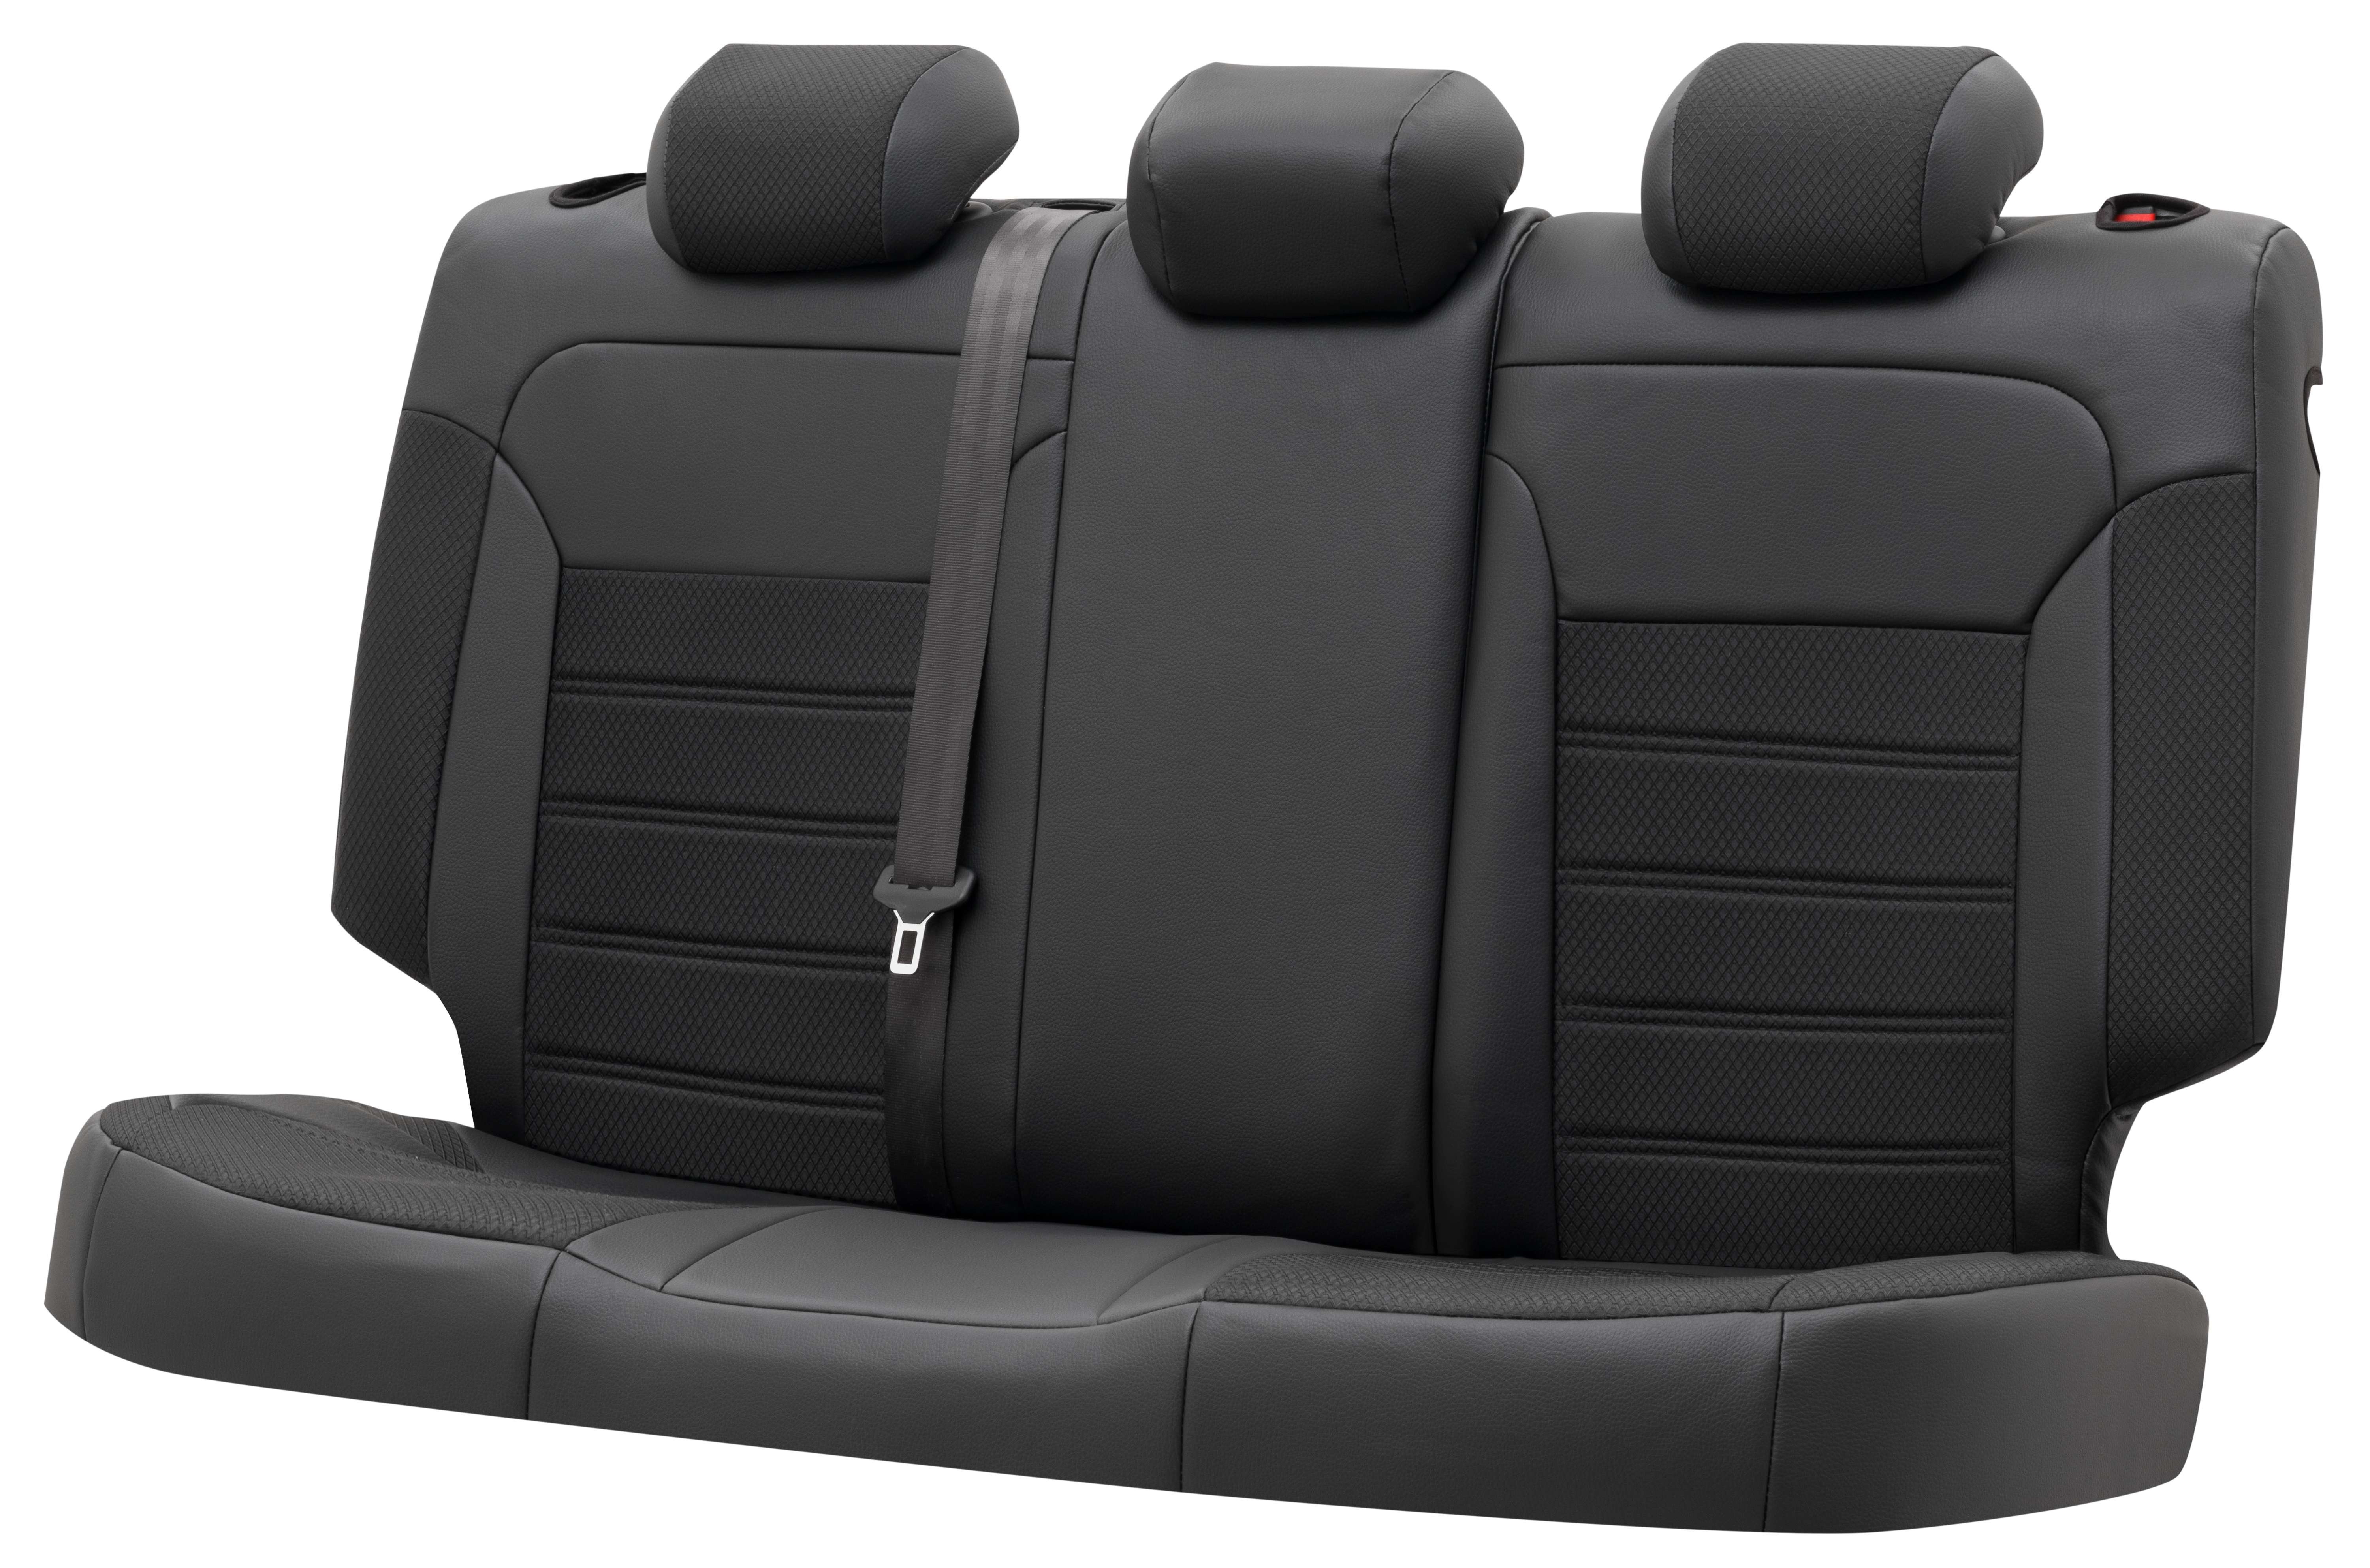 Seat Cover Aversa for Ford Focus 2012-Today, 1 rear seat cover